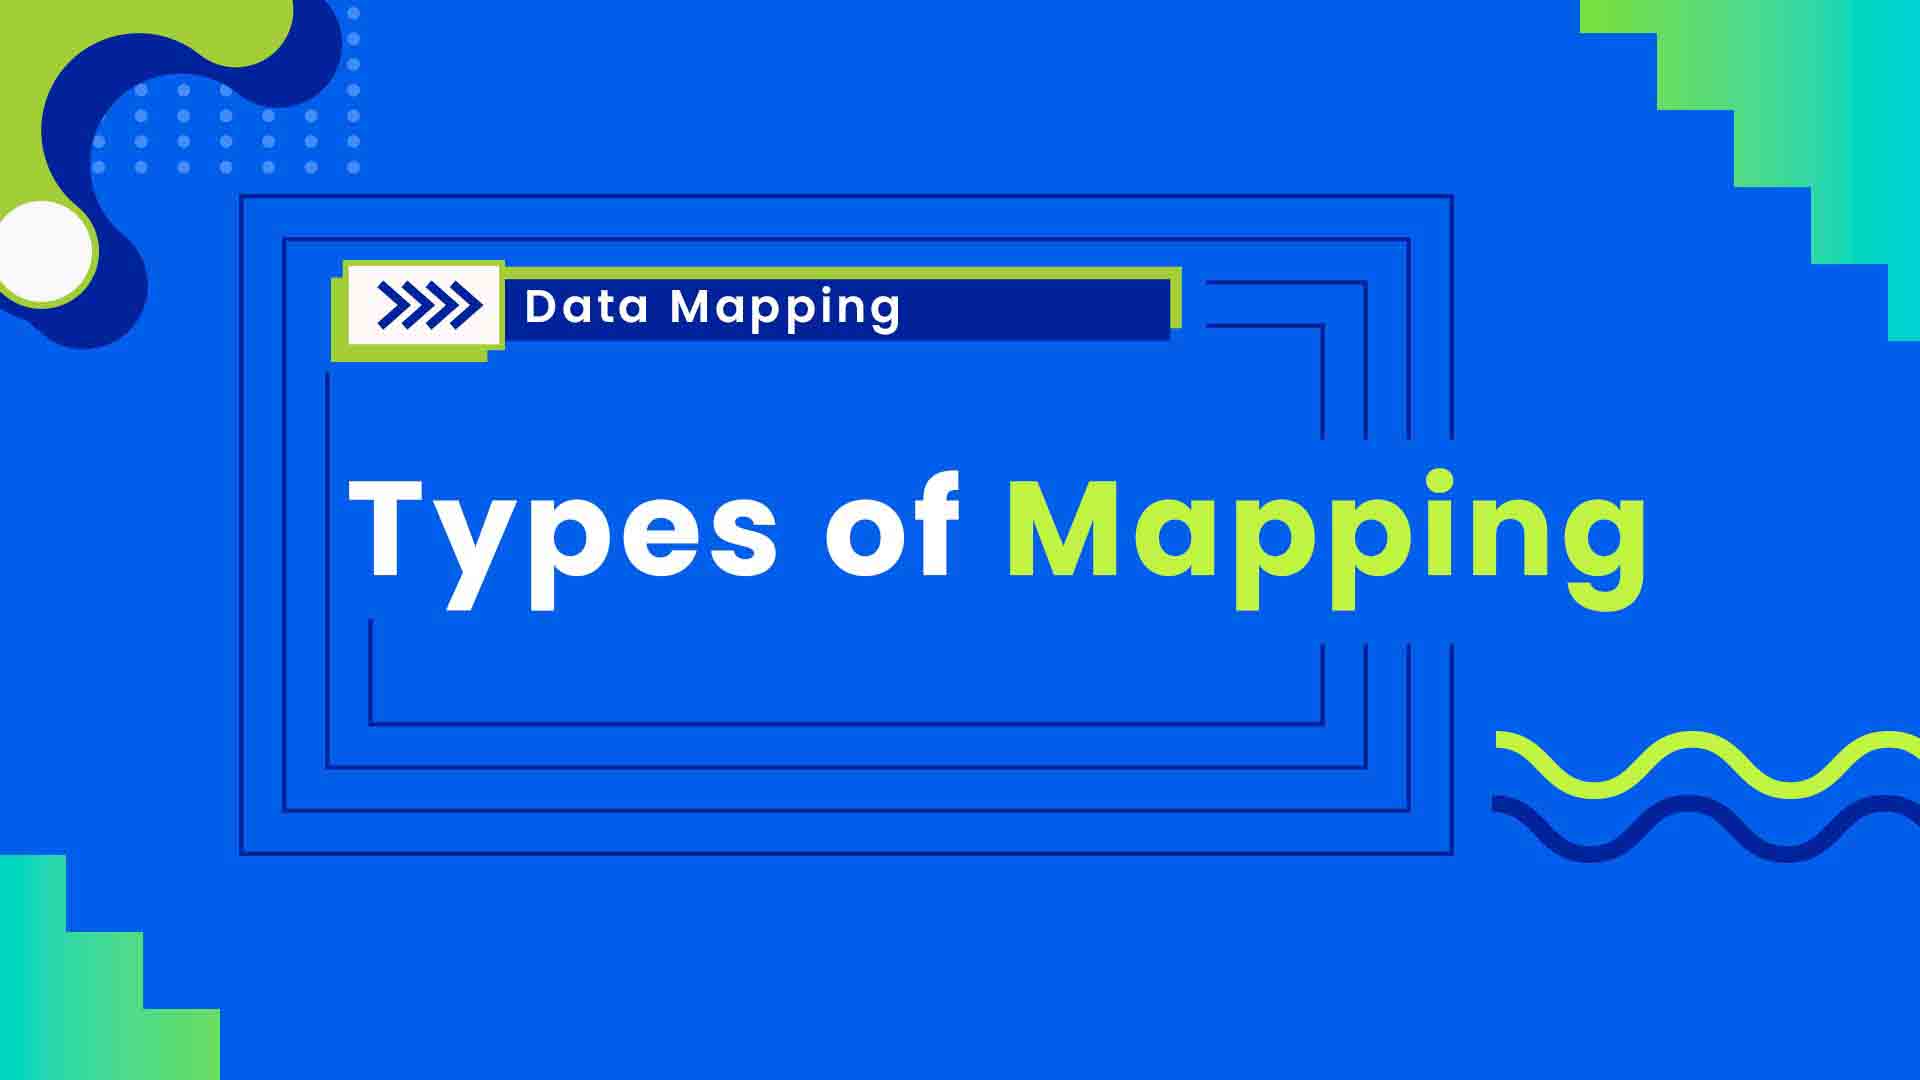 3. Types of Mapping